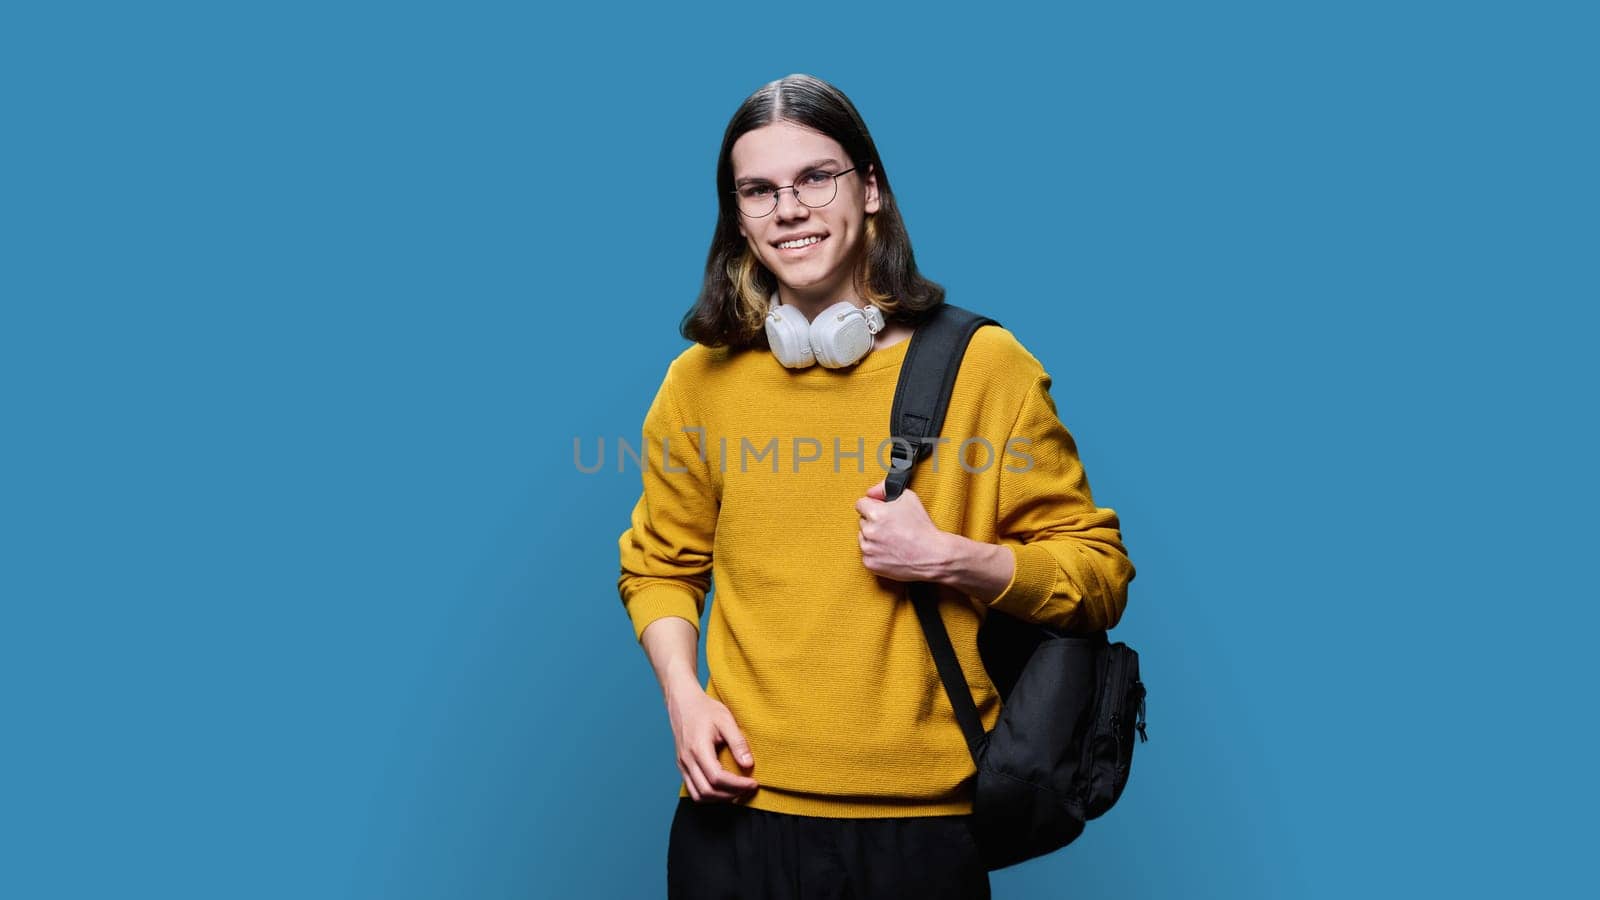 Portrait of university student guy on blue studio background. Smiling handsome young male with backpack looking at camera. College, university, education, knowledge, youth concept